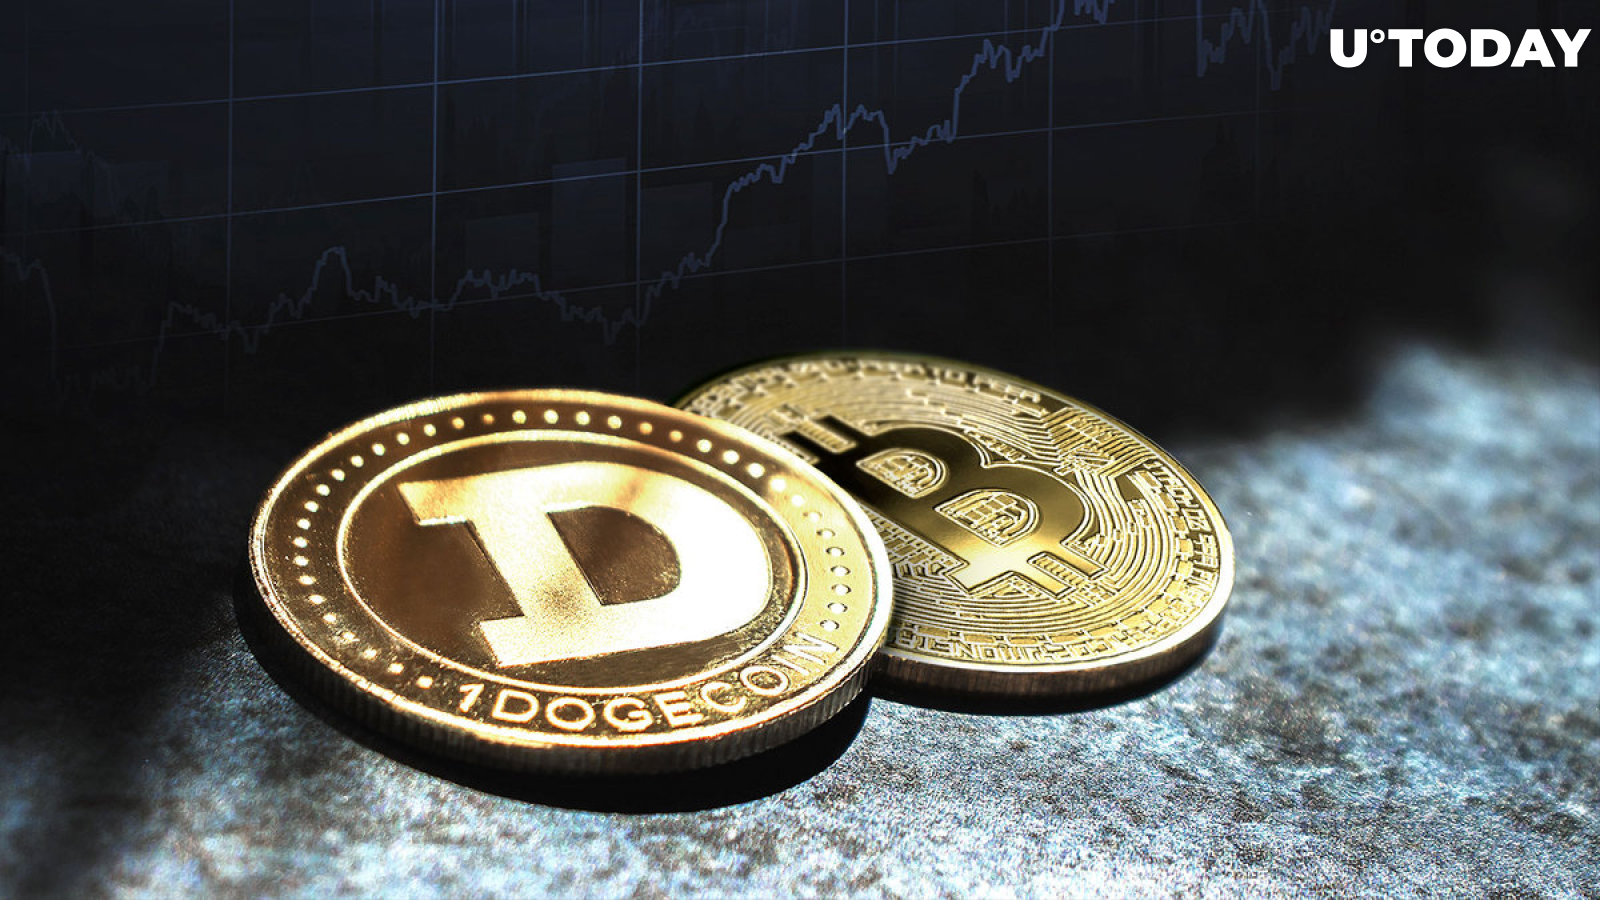 Dogecoin Founder Offers Extraordinary Bitcoin Price Outlook